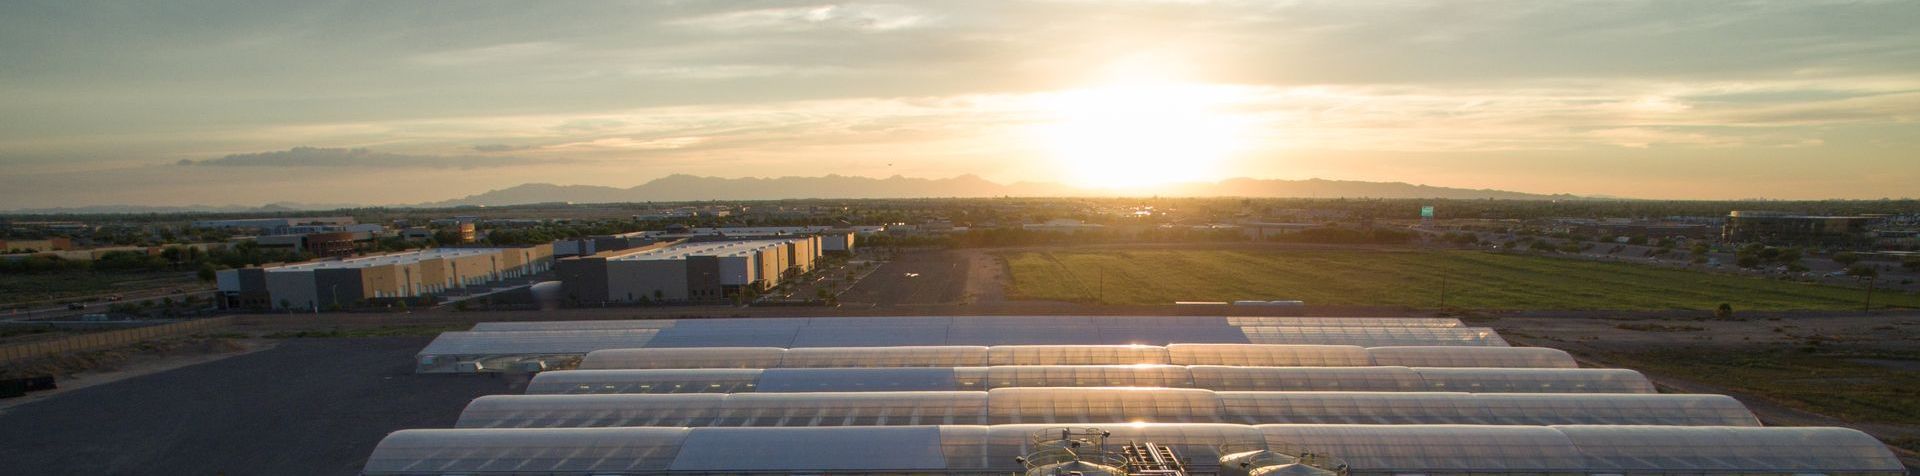 An aerial view of a greenhouse at sunset. Photo by Phoenix Drone Pros, Robert Biggs,